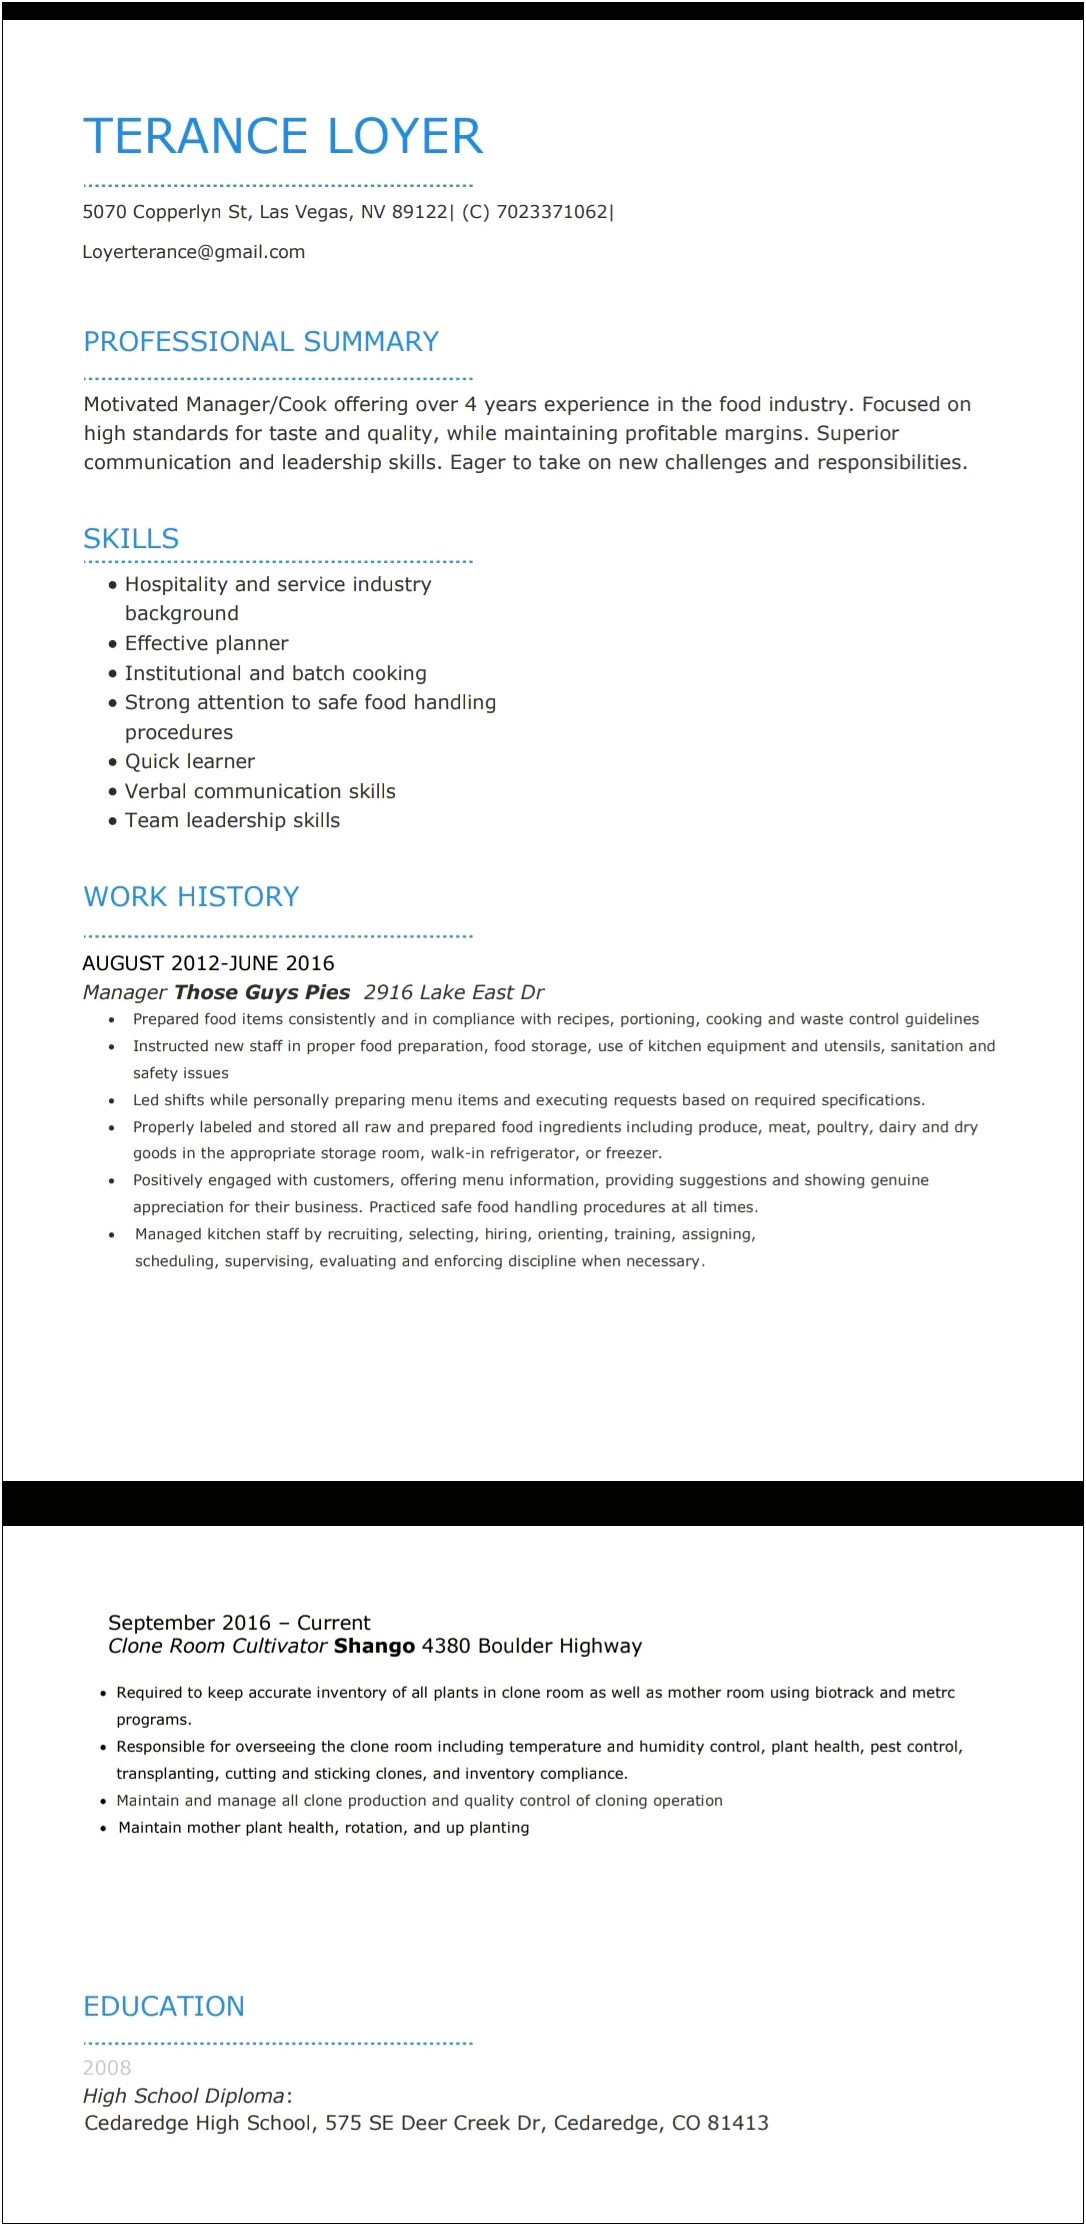 Sample Resume And Cover Letter Cannabis